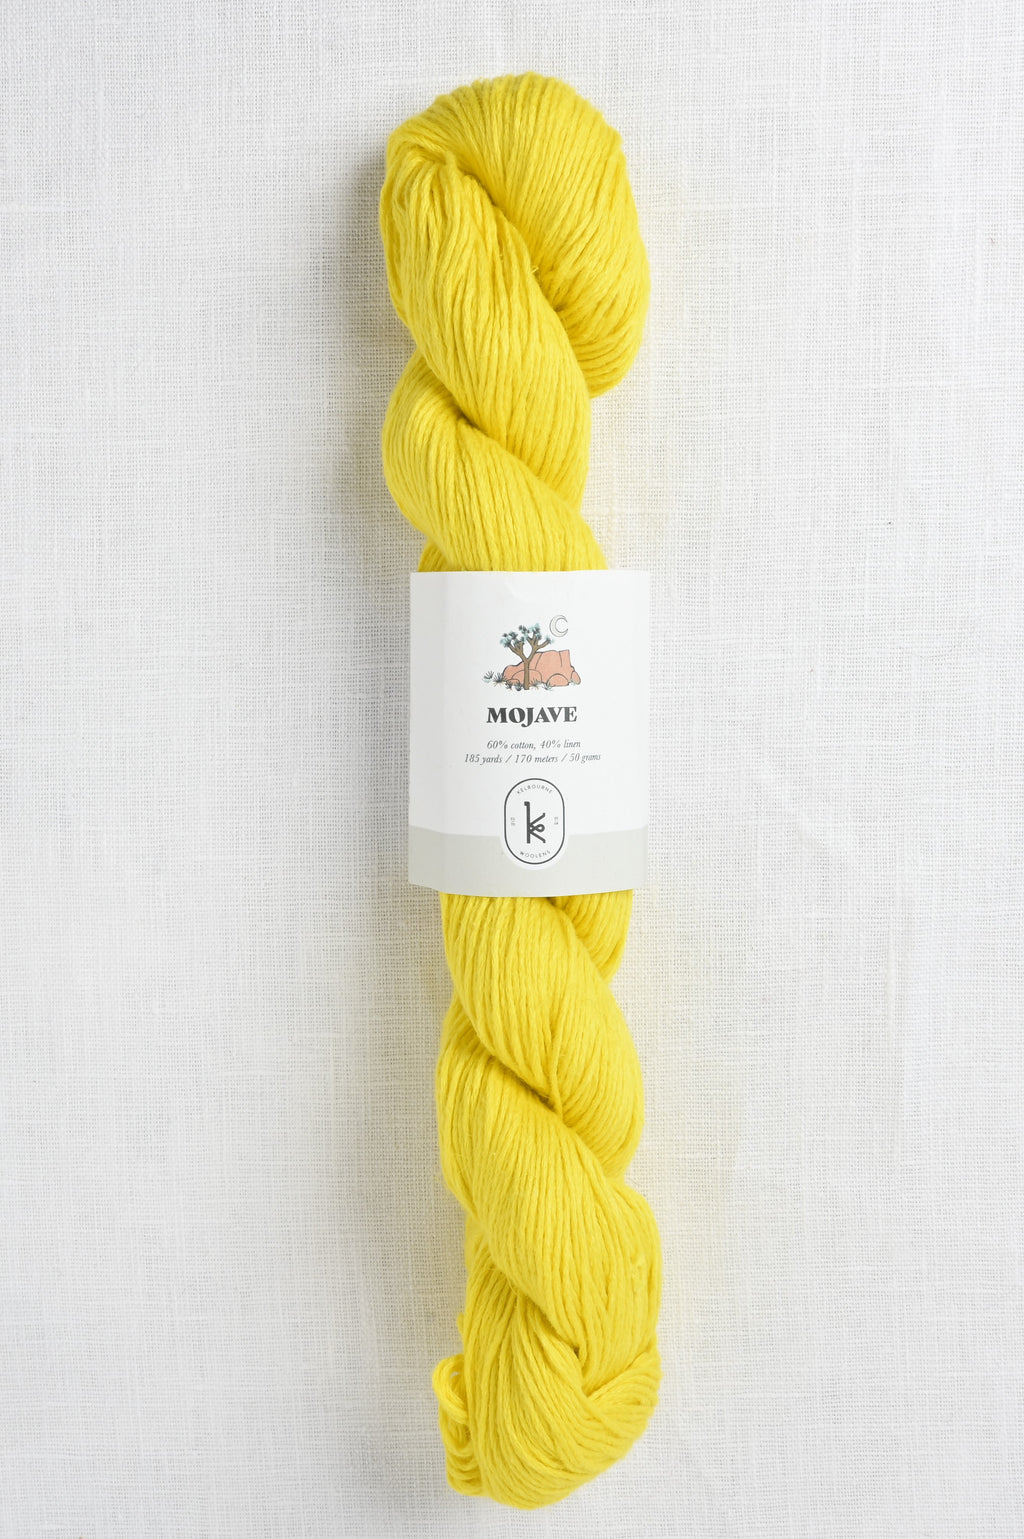 kelbourne woolens mojave 737 bright yellow